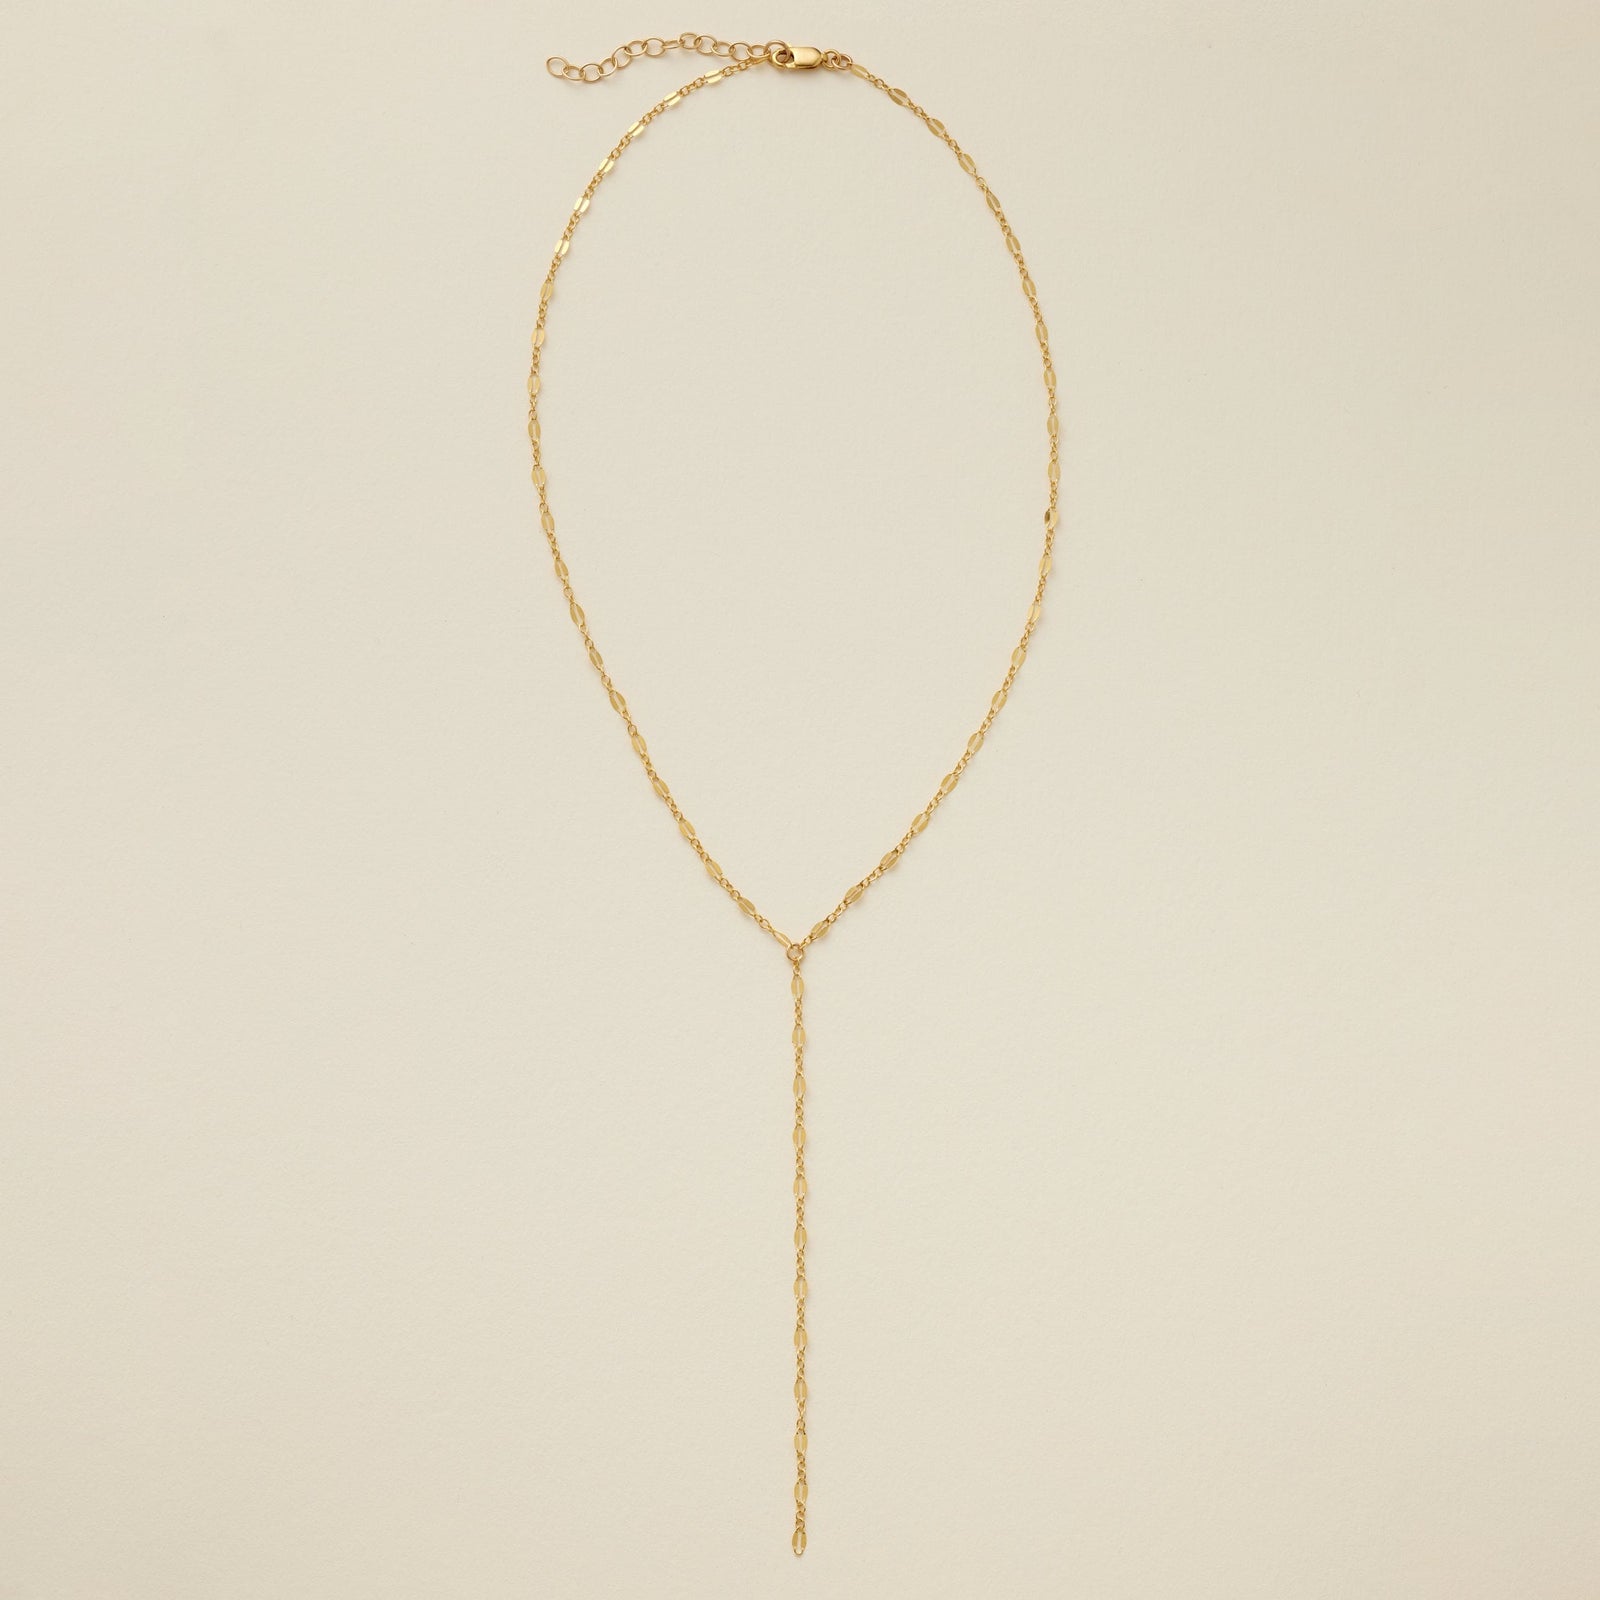 Lace Lariat Necklace Gold Filled Necklace